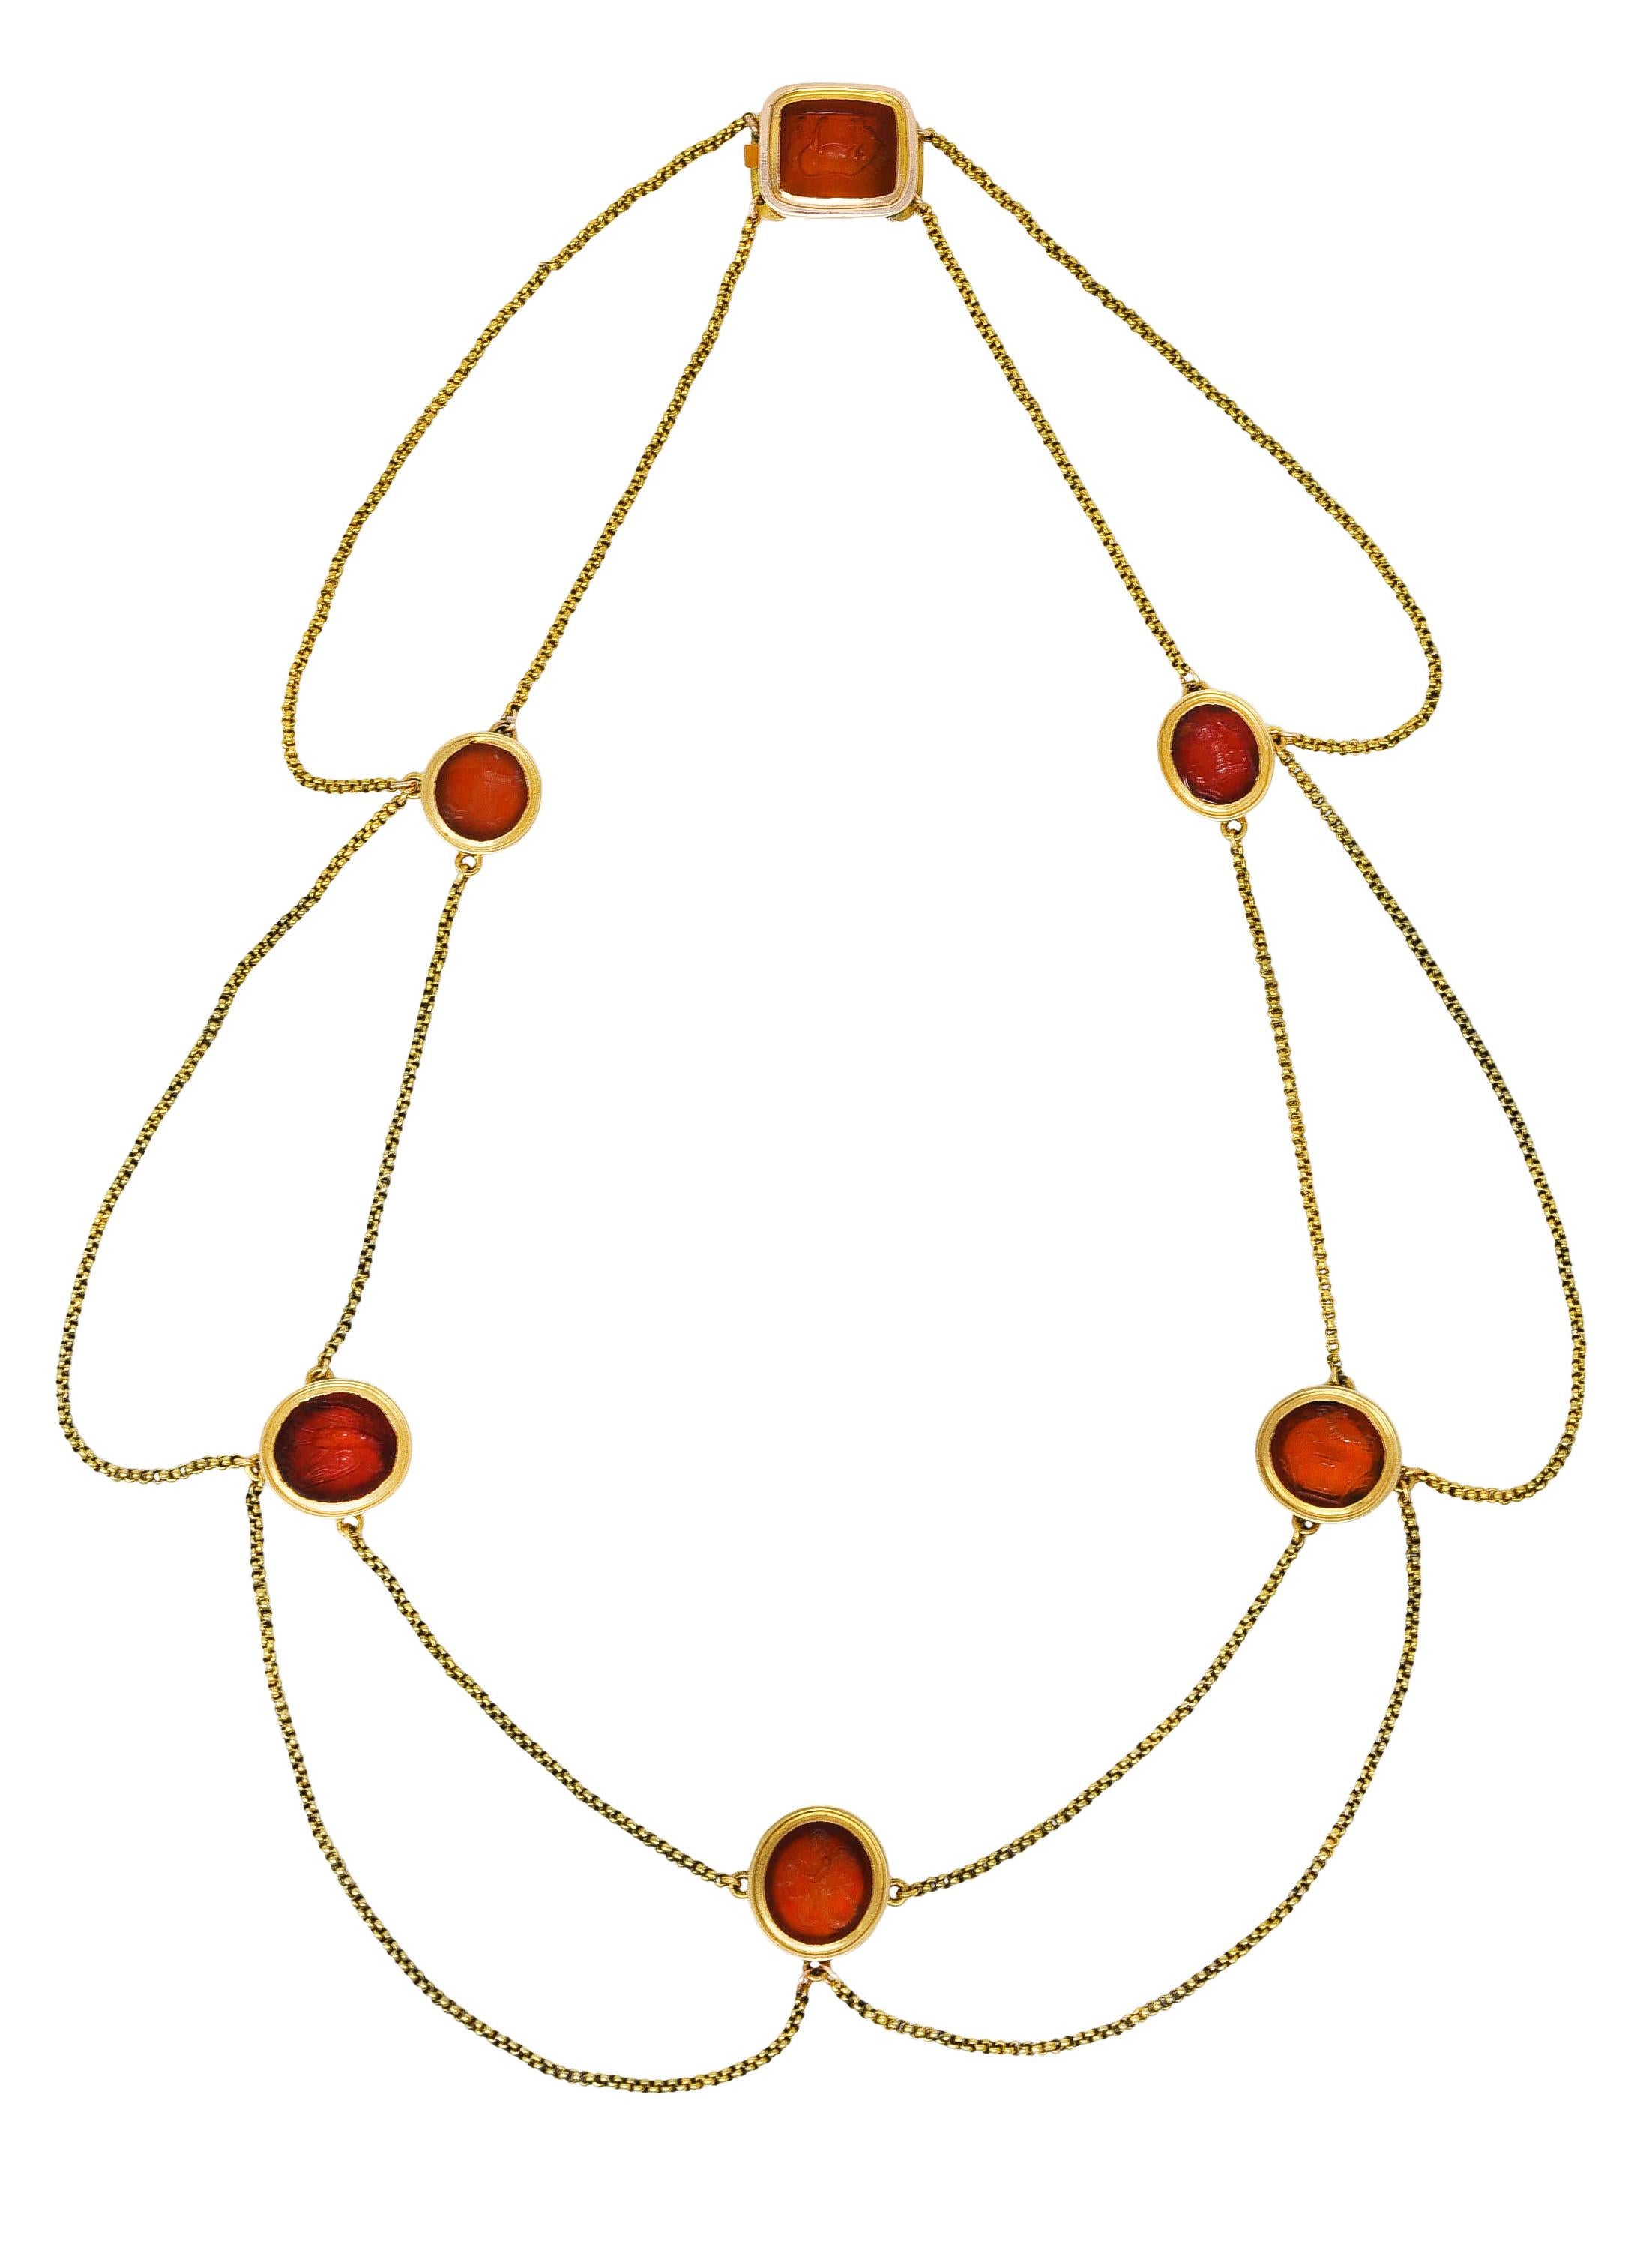 Necklace is designed as swagged rolo chain with six carved intaglio carnelian stations

Translucent reddish orange in color with medium saturation - ranging in size and shape

Depicting a siren, eagle, horse, leaping goat, ram, and wooly goat

Bezel